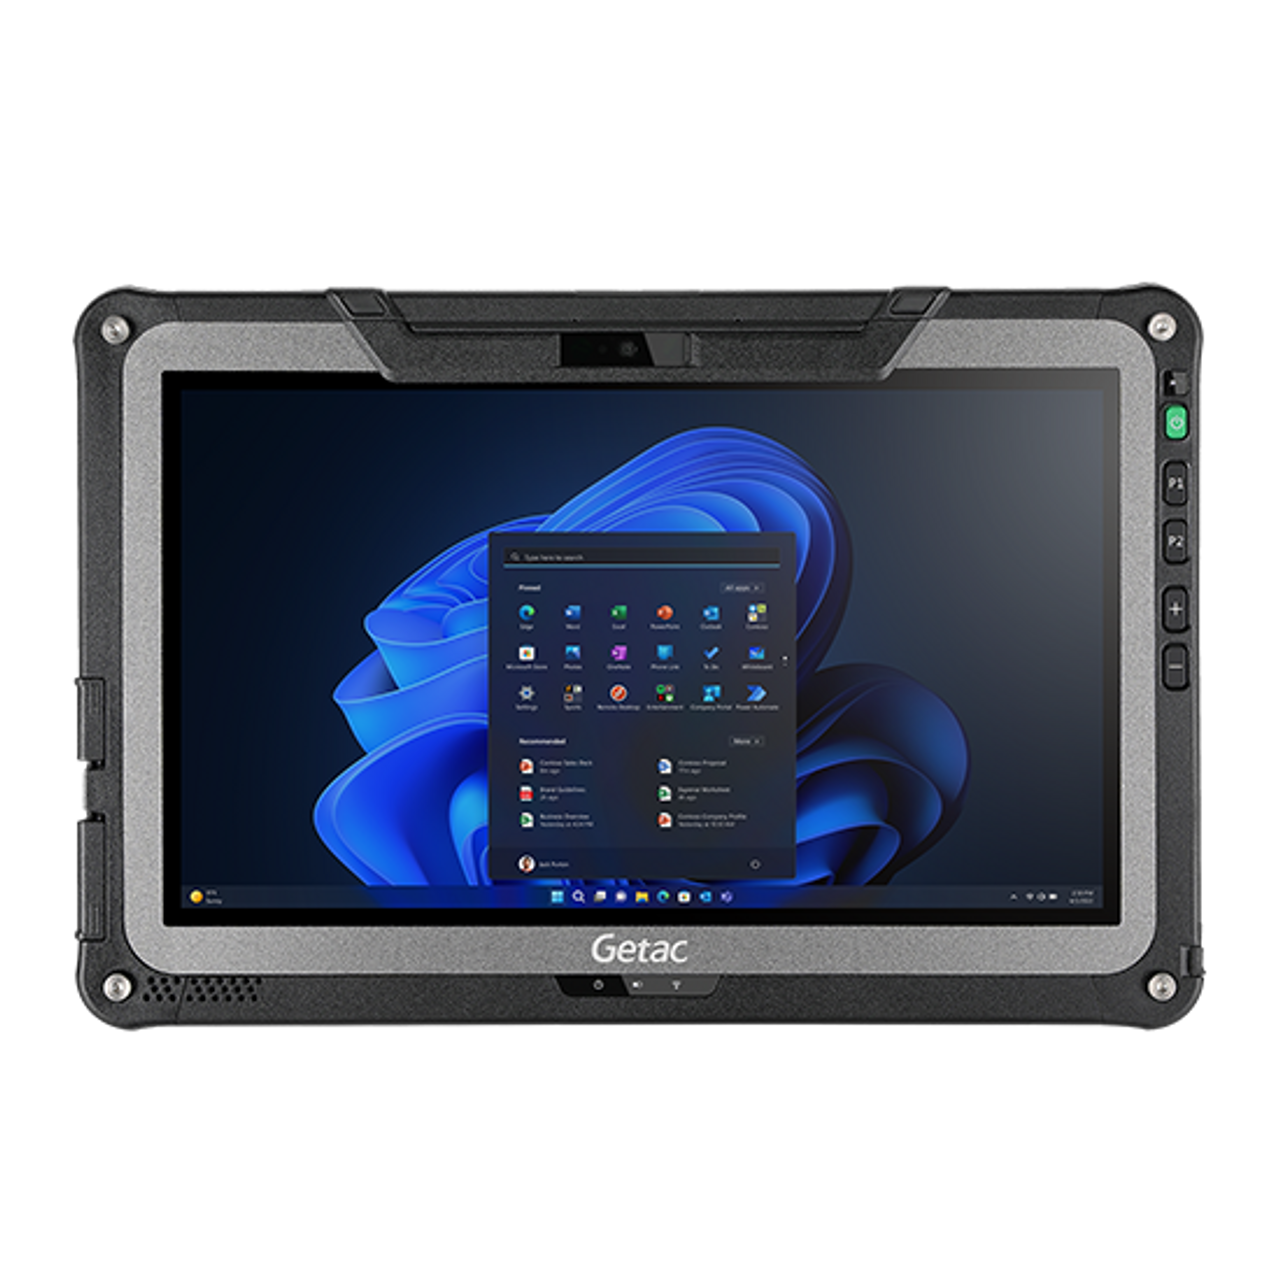 Getac F110 G6 TAA -i5-1145G7 vPro, 11.6inch (Without Webcam), W 10 Pro x64 16GB RAM + TAA, 512GB PCIe SSD, SR (Full HD LCD+ Touchscreen+Hard Tip stylus), US Power Cord, (Without Rear Camera), WiFi + BT, Scrdr 3yb2b